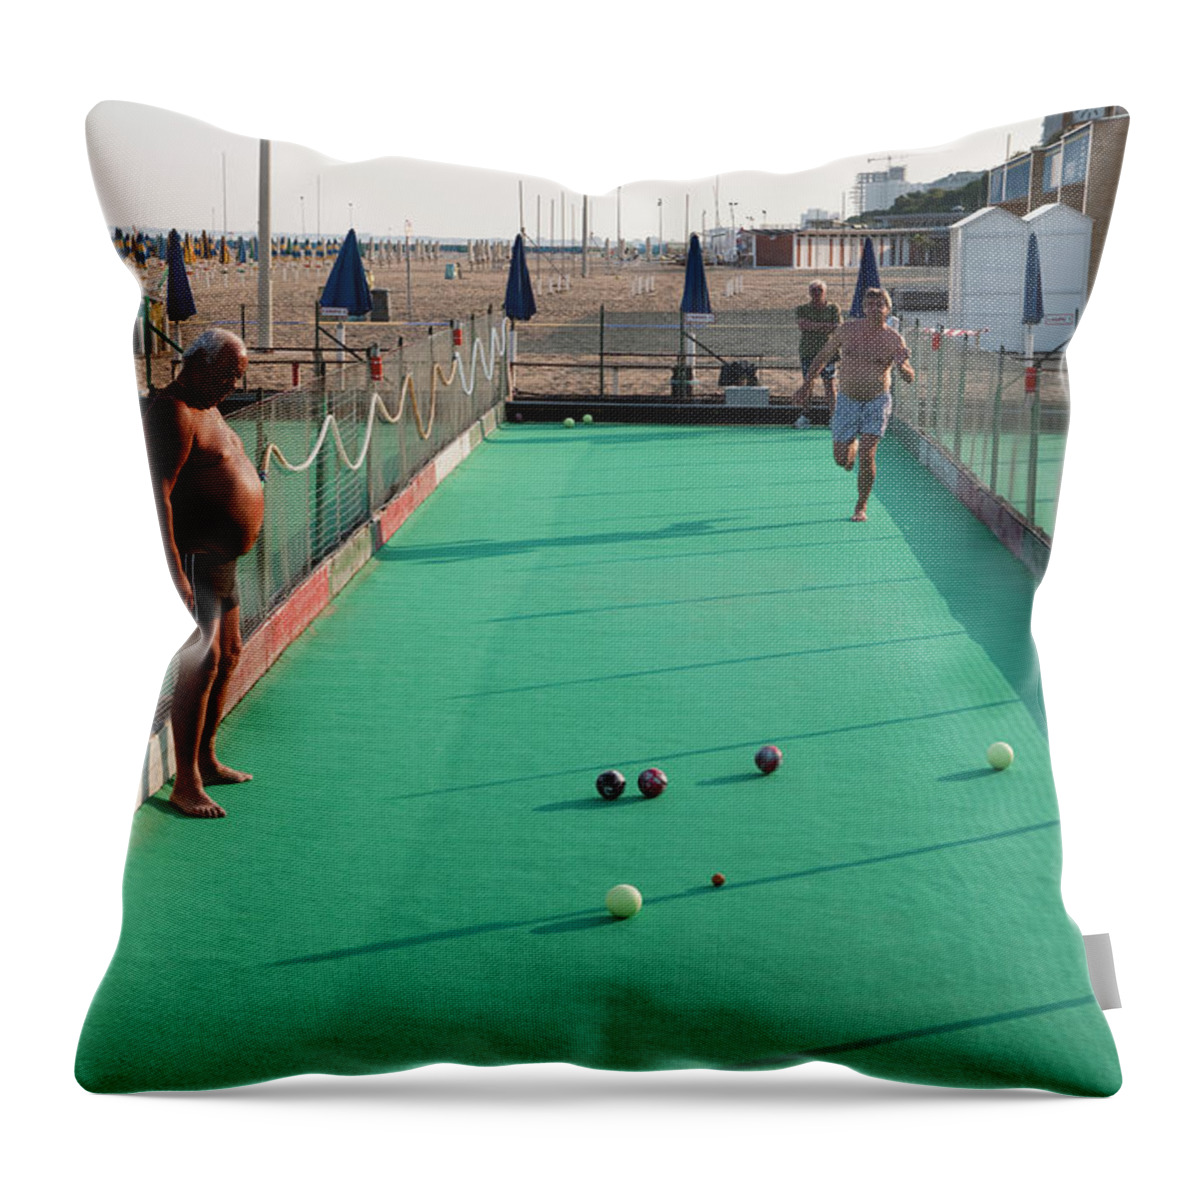 Mature Adult Throw Pillow featuring the photograph Men Play Boccia At Beach by Holger Leue